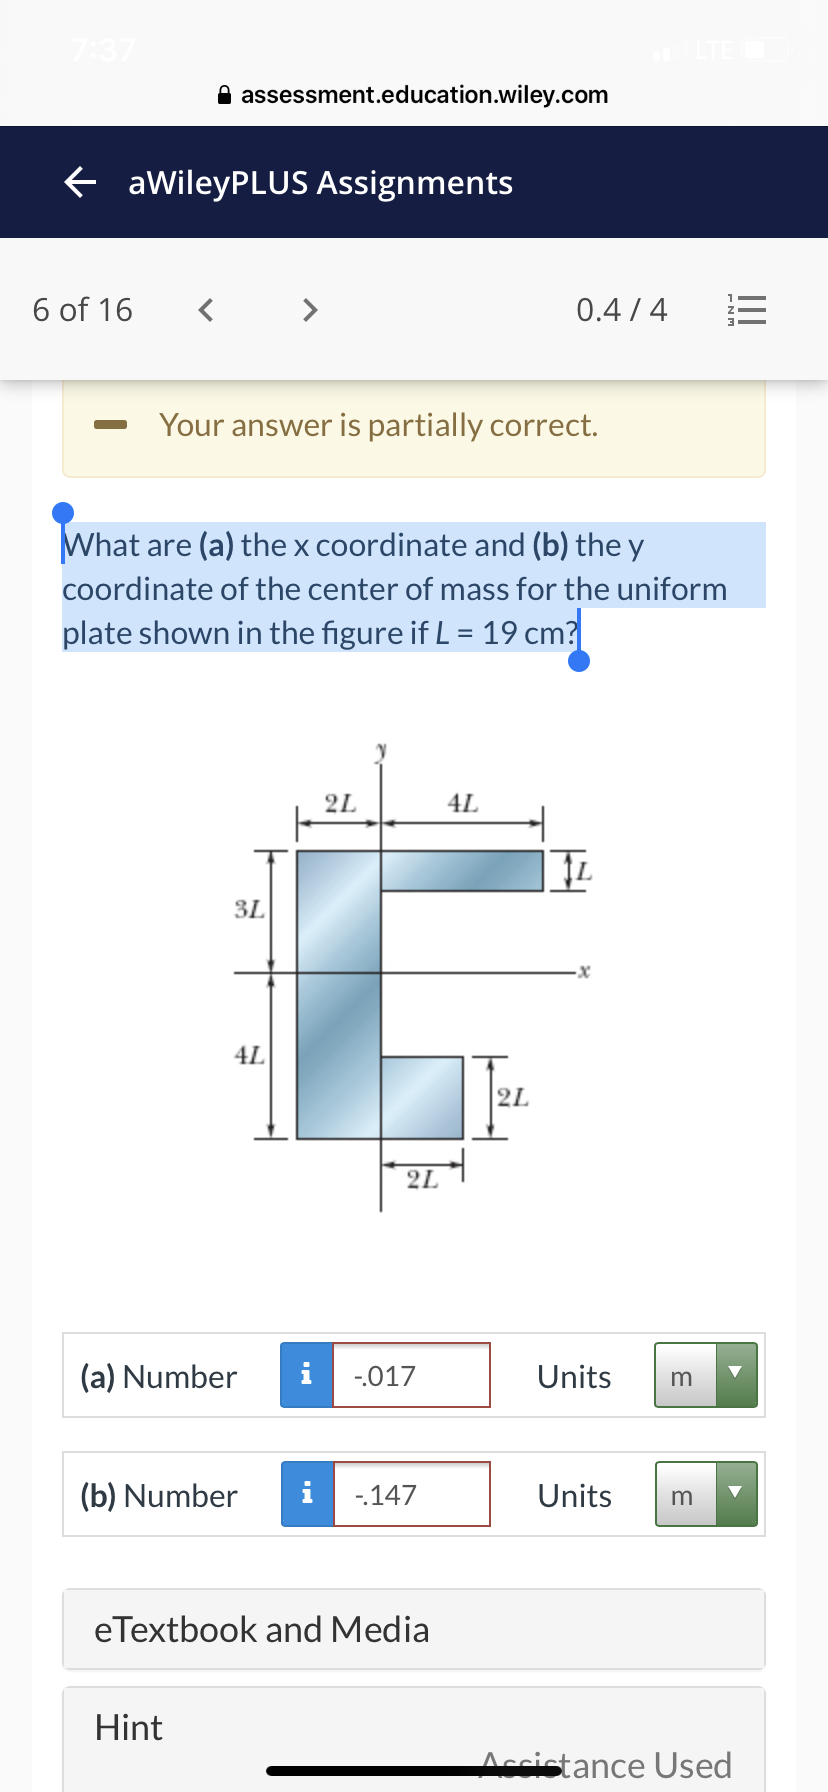 A assessment.education.wiley.com
e aWileyPLUS Assignments
6 of 16
< >
0.4 / 4
Your answer is partially correct.
What are (a) the x coordinate and (b) the y
coordinate of the center of mass for the uniform
plate shown in the figure if L = 19 cm?
%3D
2L
4L
3L
4L
2L
2L
(a) Number
i
-.017
Units
m
(b) Number
i
-147
Units
m
eTextbook and Media
Hint
Accistance Used
